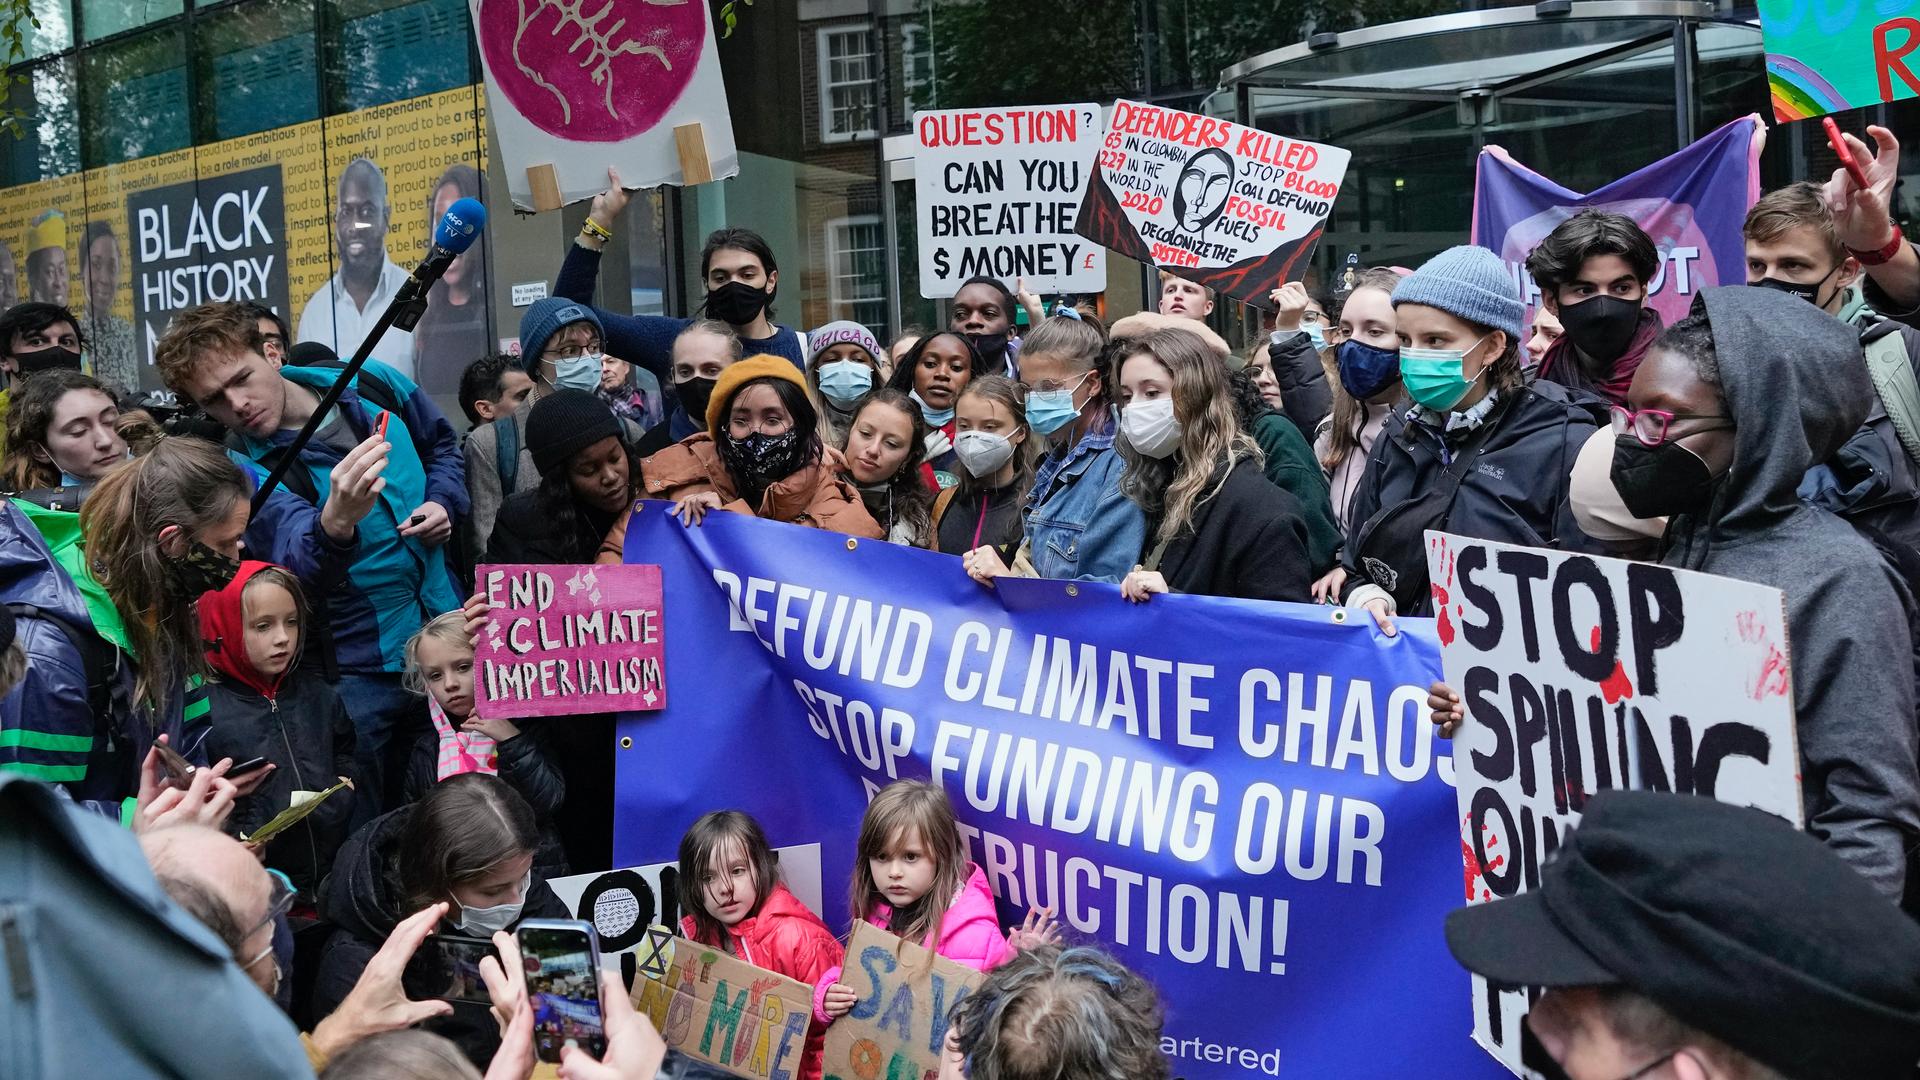 Climate activist Greta Thunberg, center, demonstrates with others in front of the Standard and Chartered Bank during a climate protest in London, Oct. 29, 2021. People were protesting in London ahead of the 26th UN Climate Change Conference (COP26), which